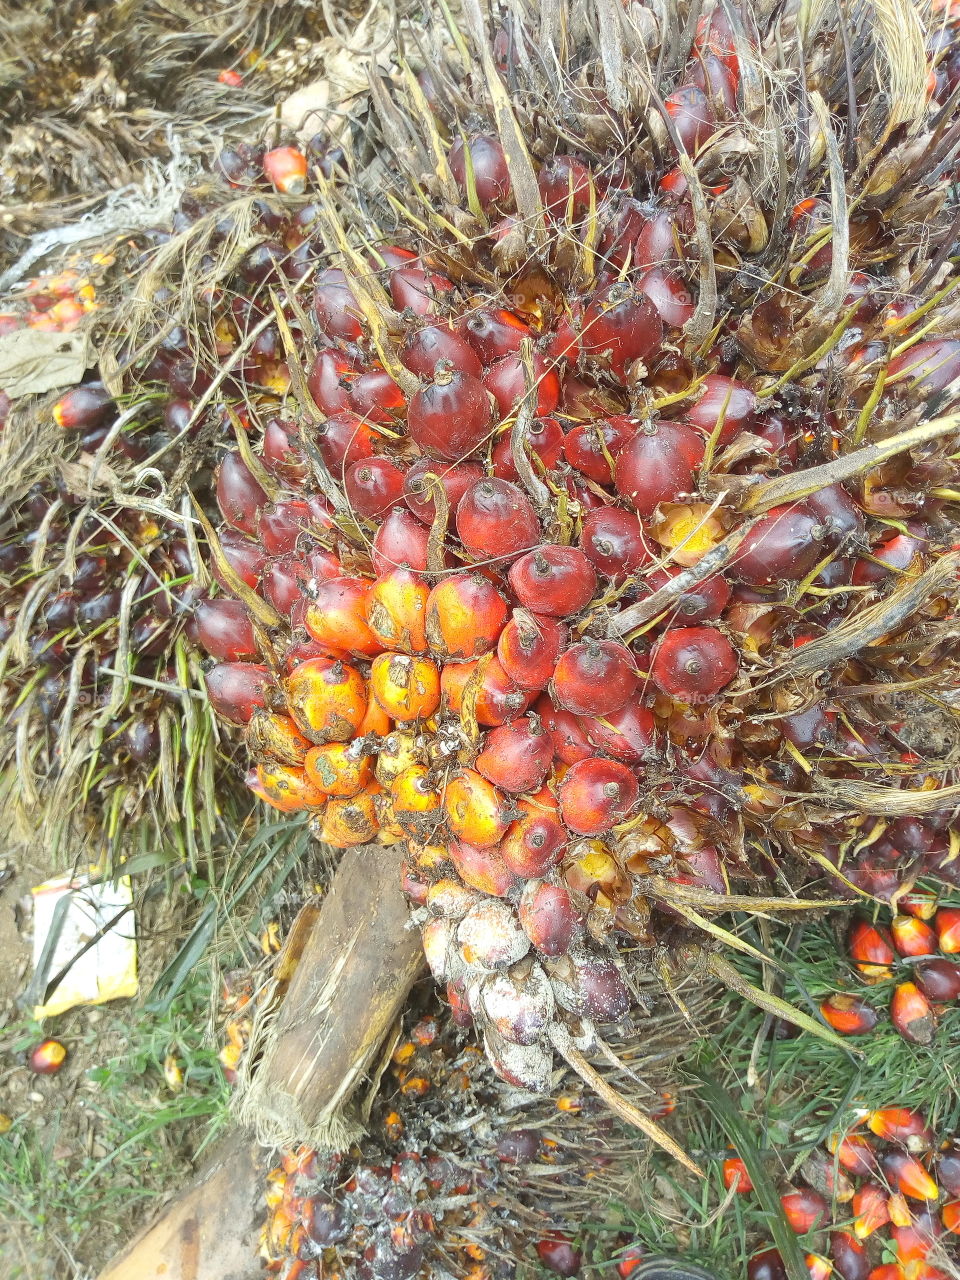 Palm canel nut bunches